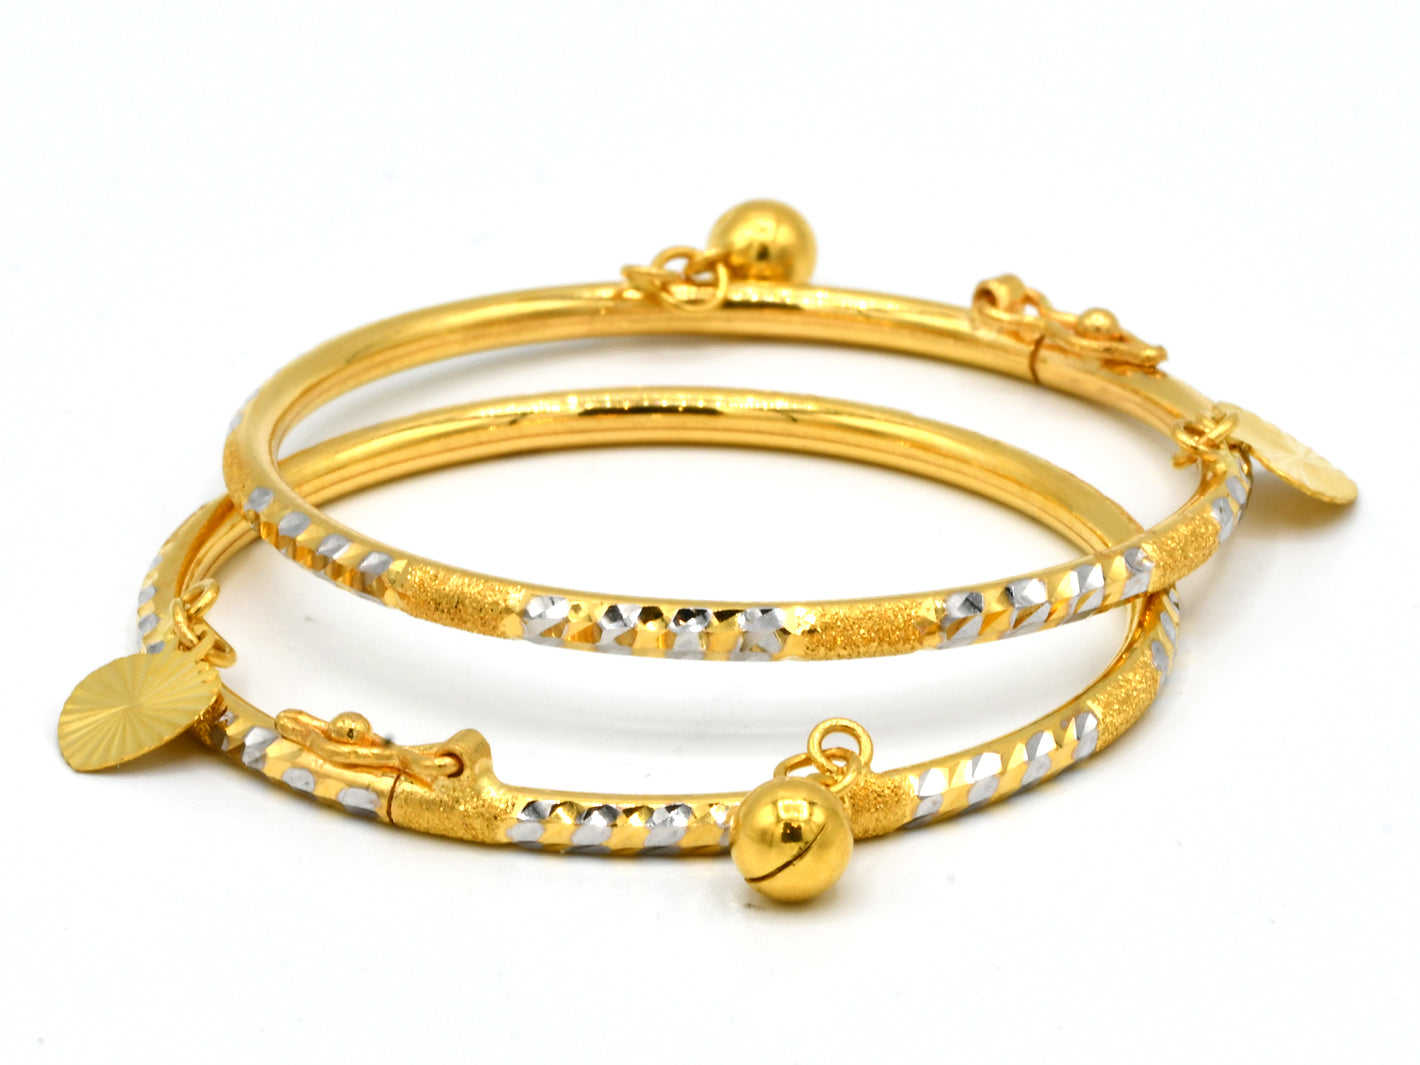 22ct Gold 2 Piece Two Tone Baby Bangles with Gugri &amp; Charm - Roop Darshan